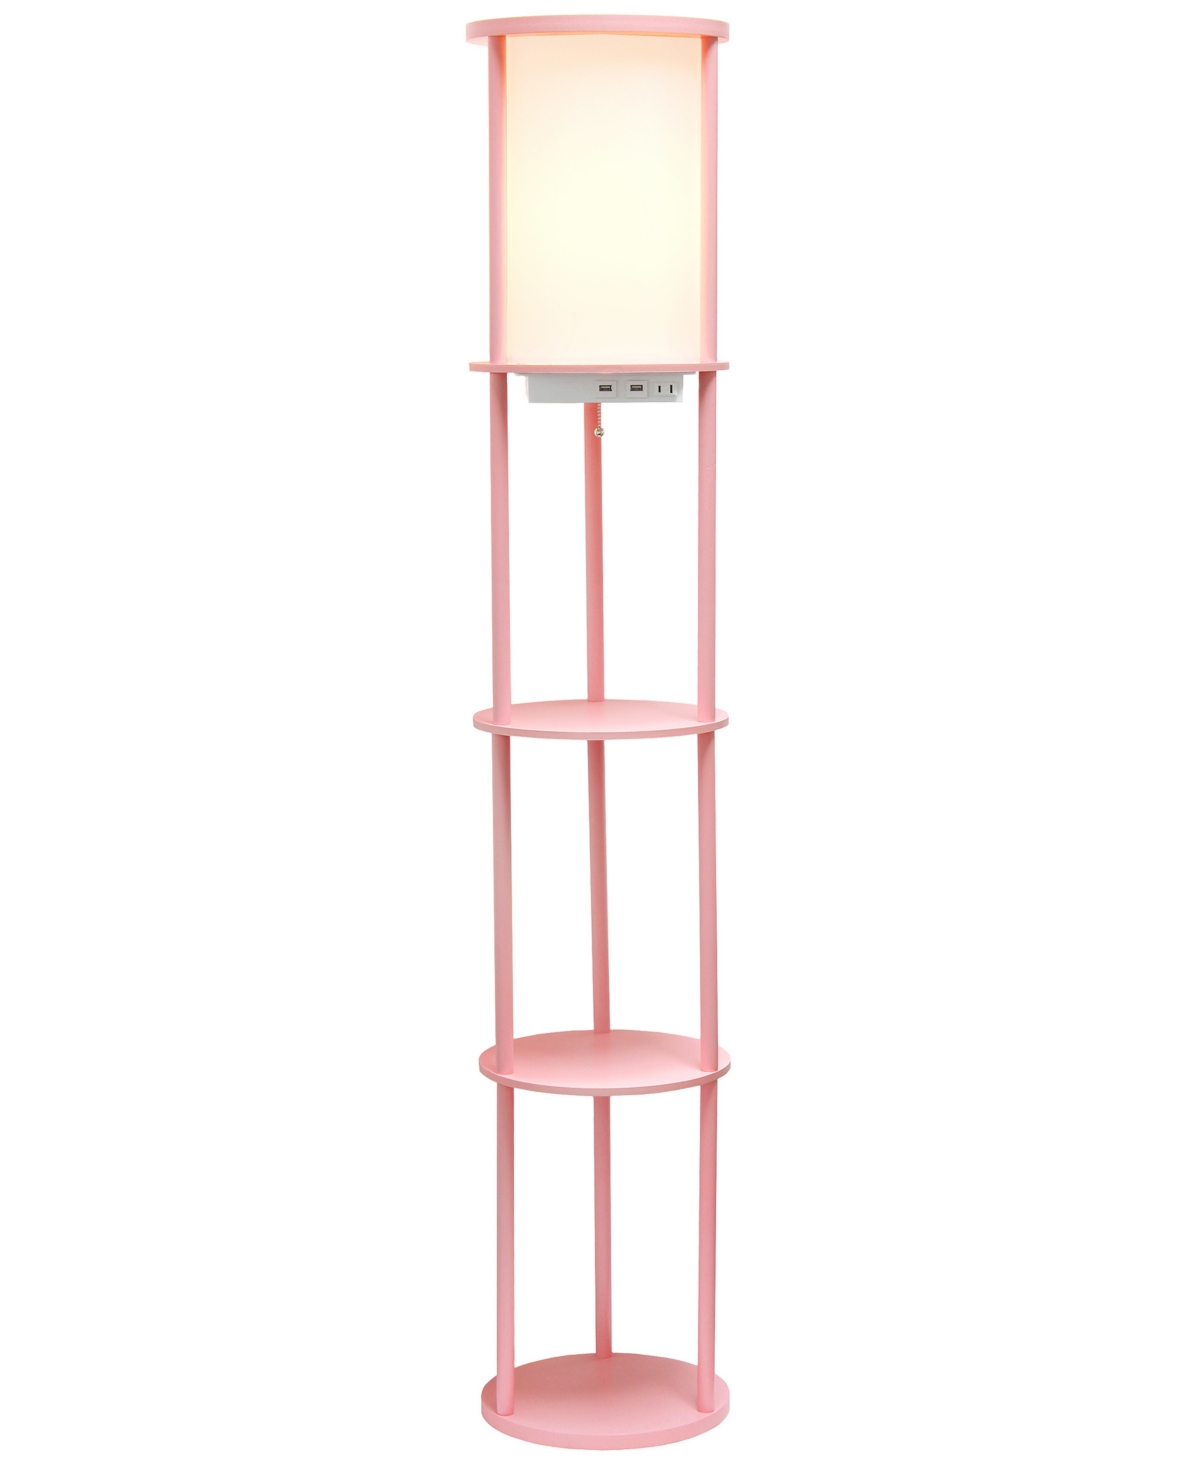 All The Rages Etagere Organizer Storage Floor Lamp With 2 Usb Charging Ports, 1 Charging Outlet In Light Pink